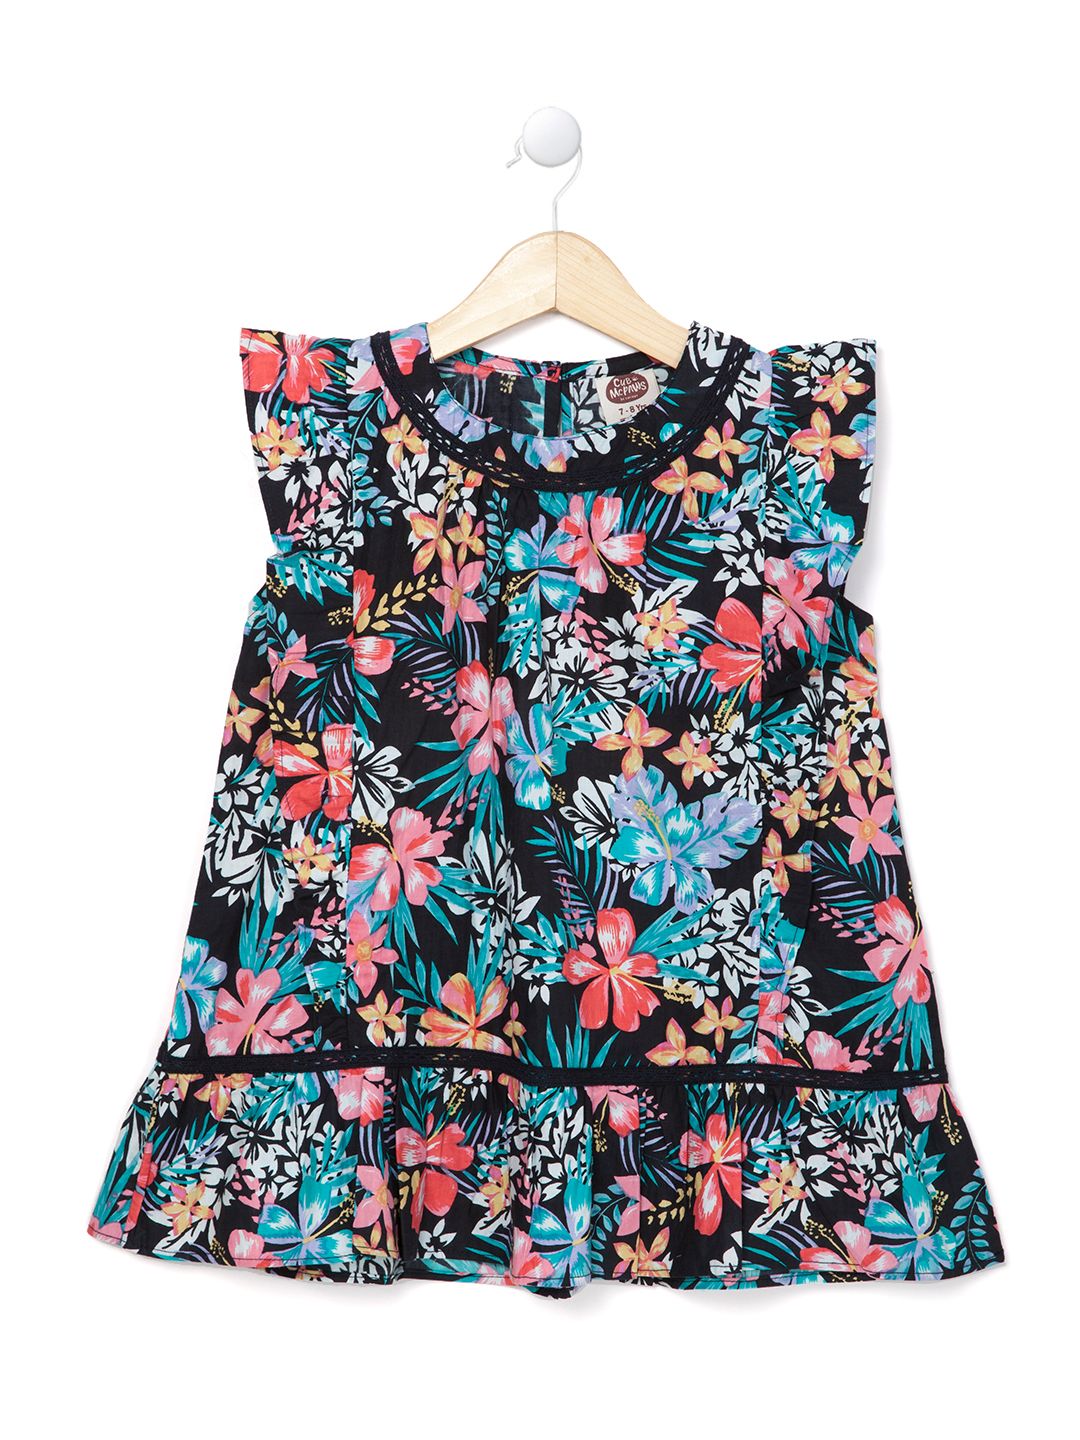 Girls Top Cotton Black Tropical Floral Print for 4-12 Years